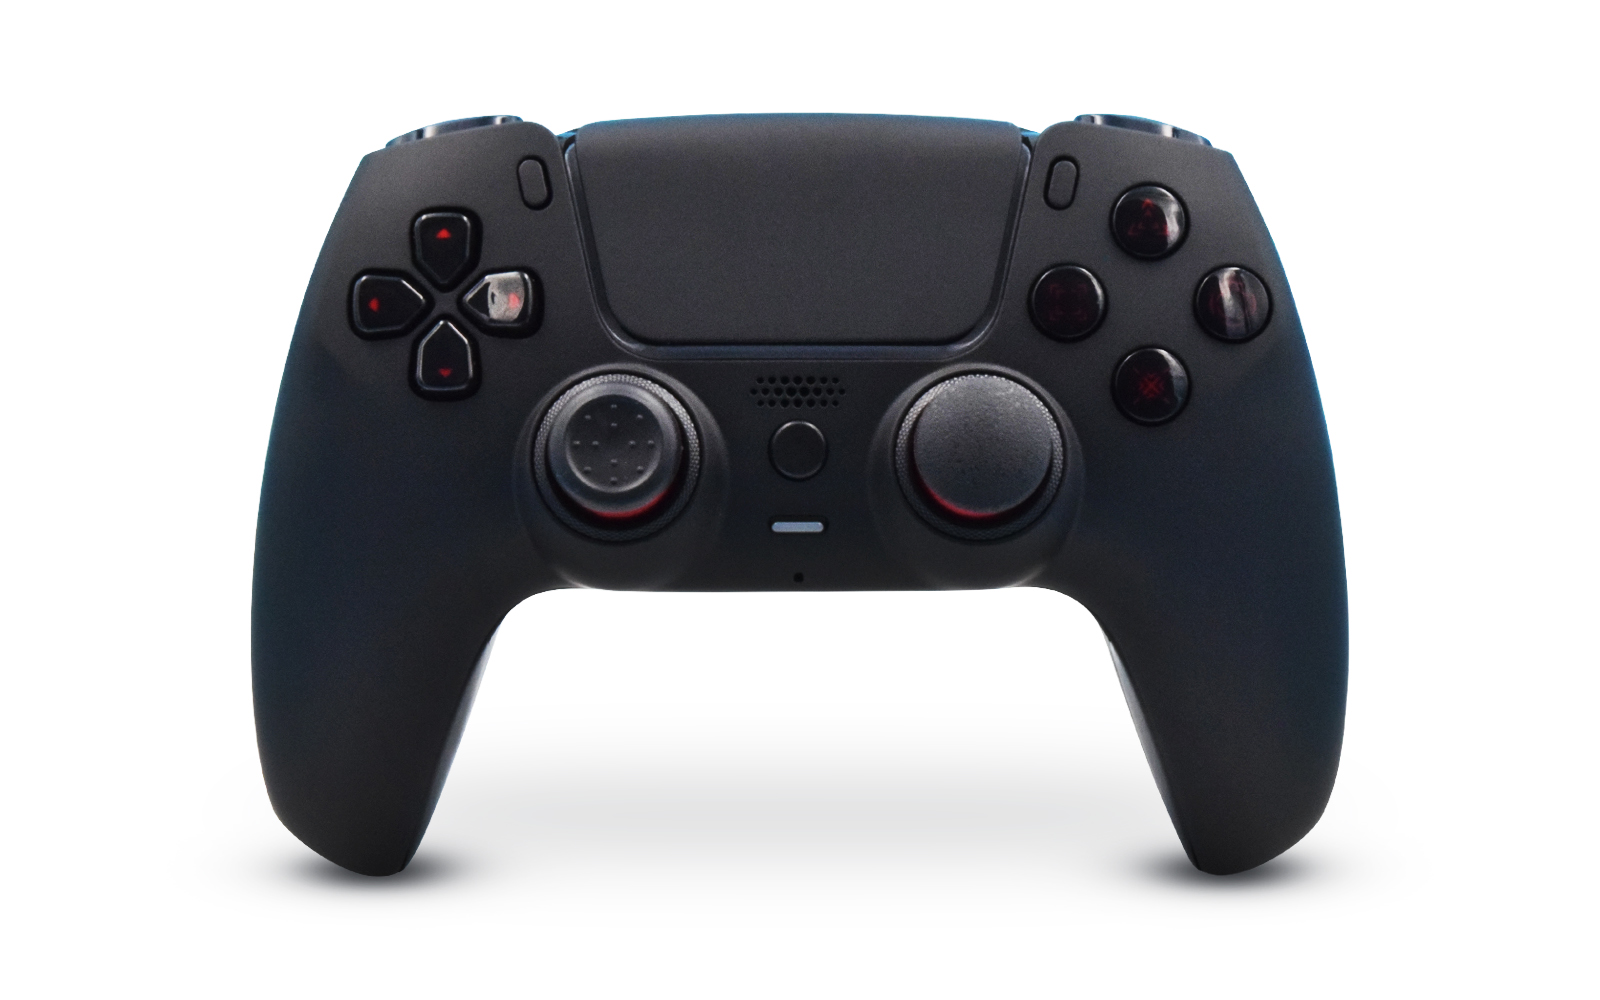 DualSense Edge VS Wolverine V2 Pro Review: Which PS5 Controller Should You  Buy?